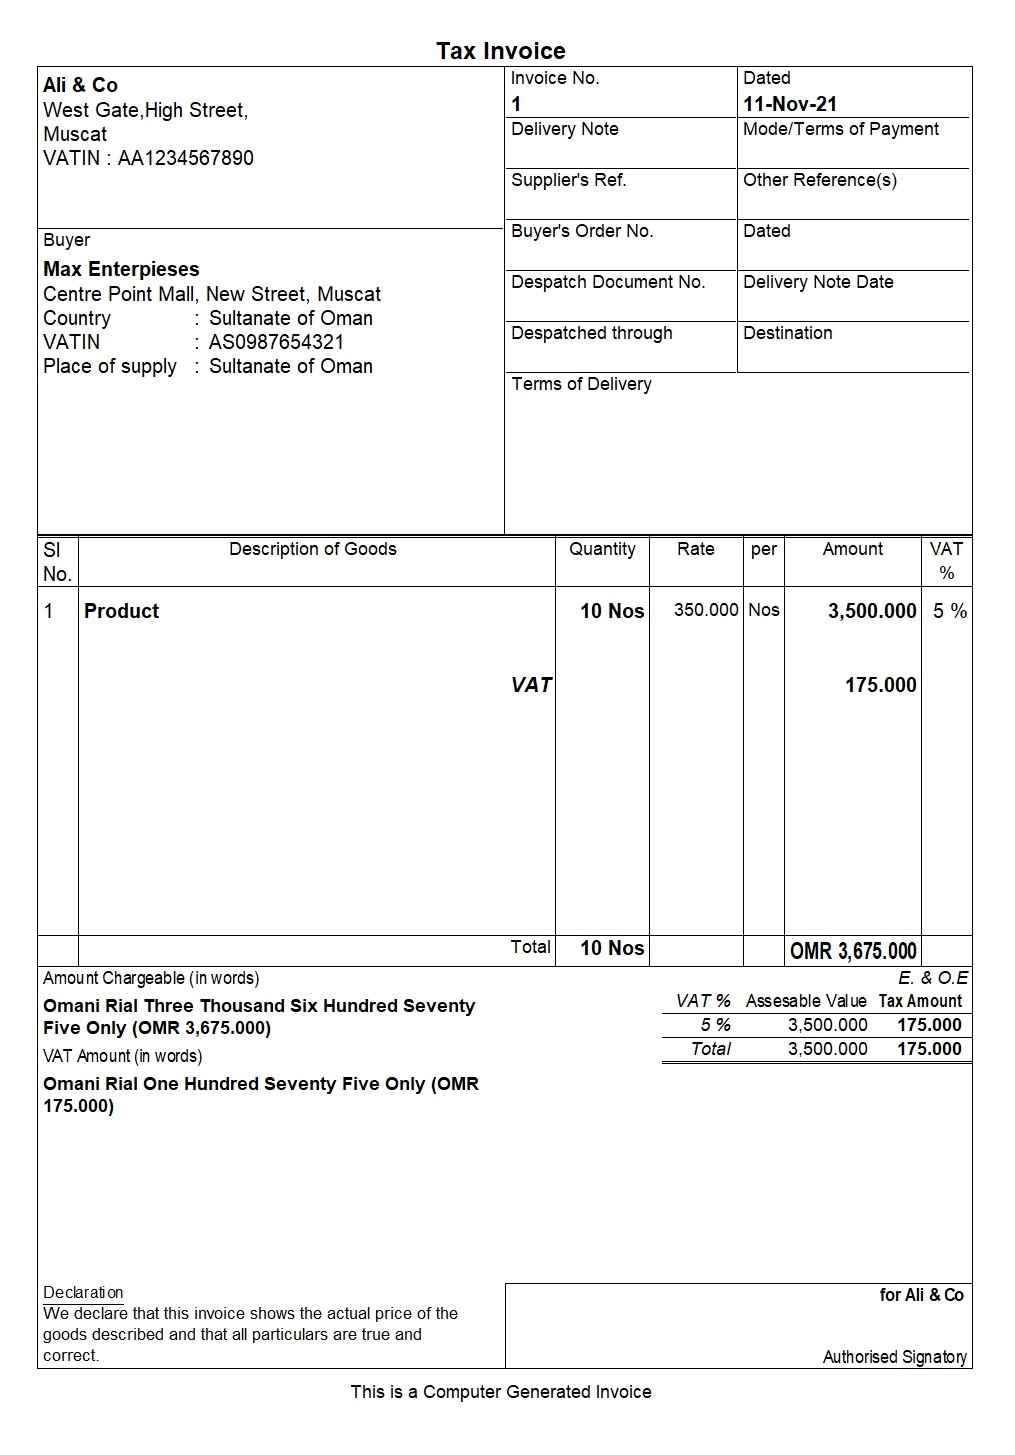 tax invoice format 1 in tallyprime